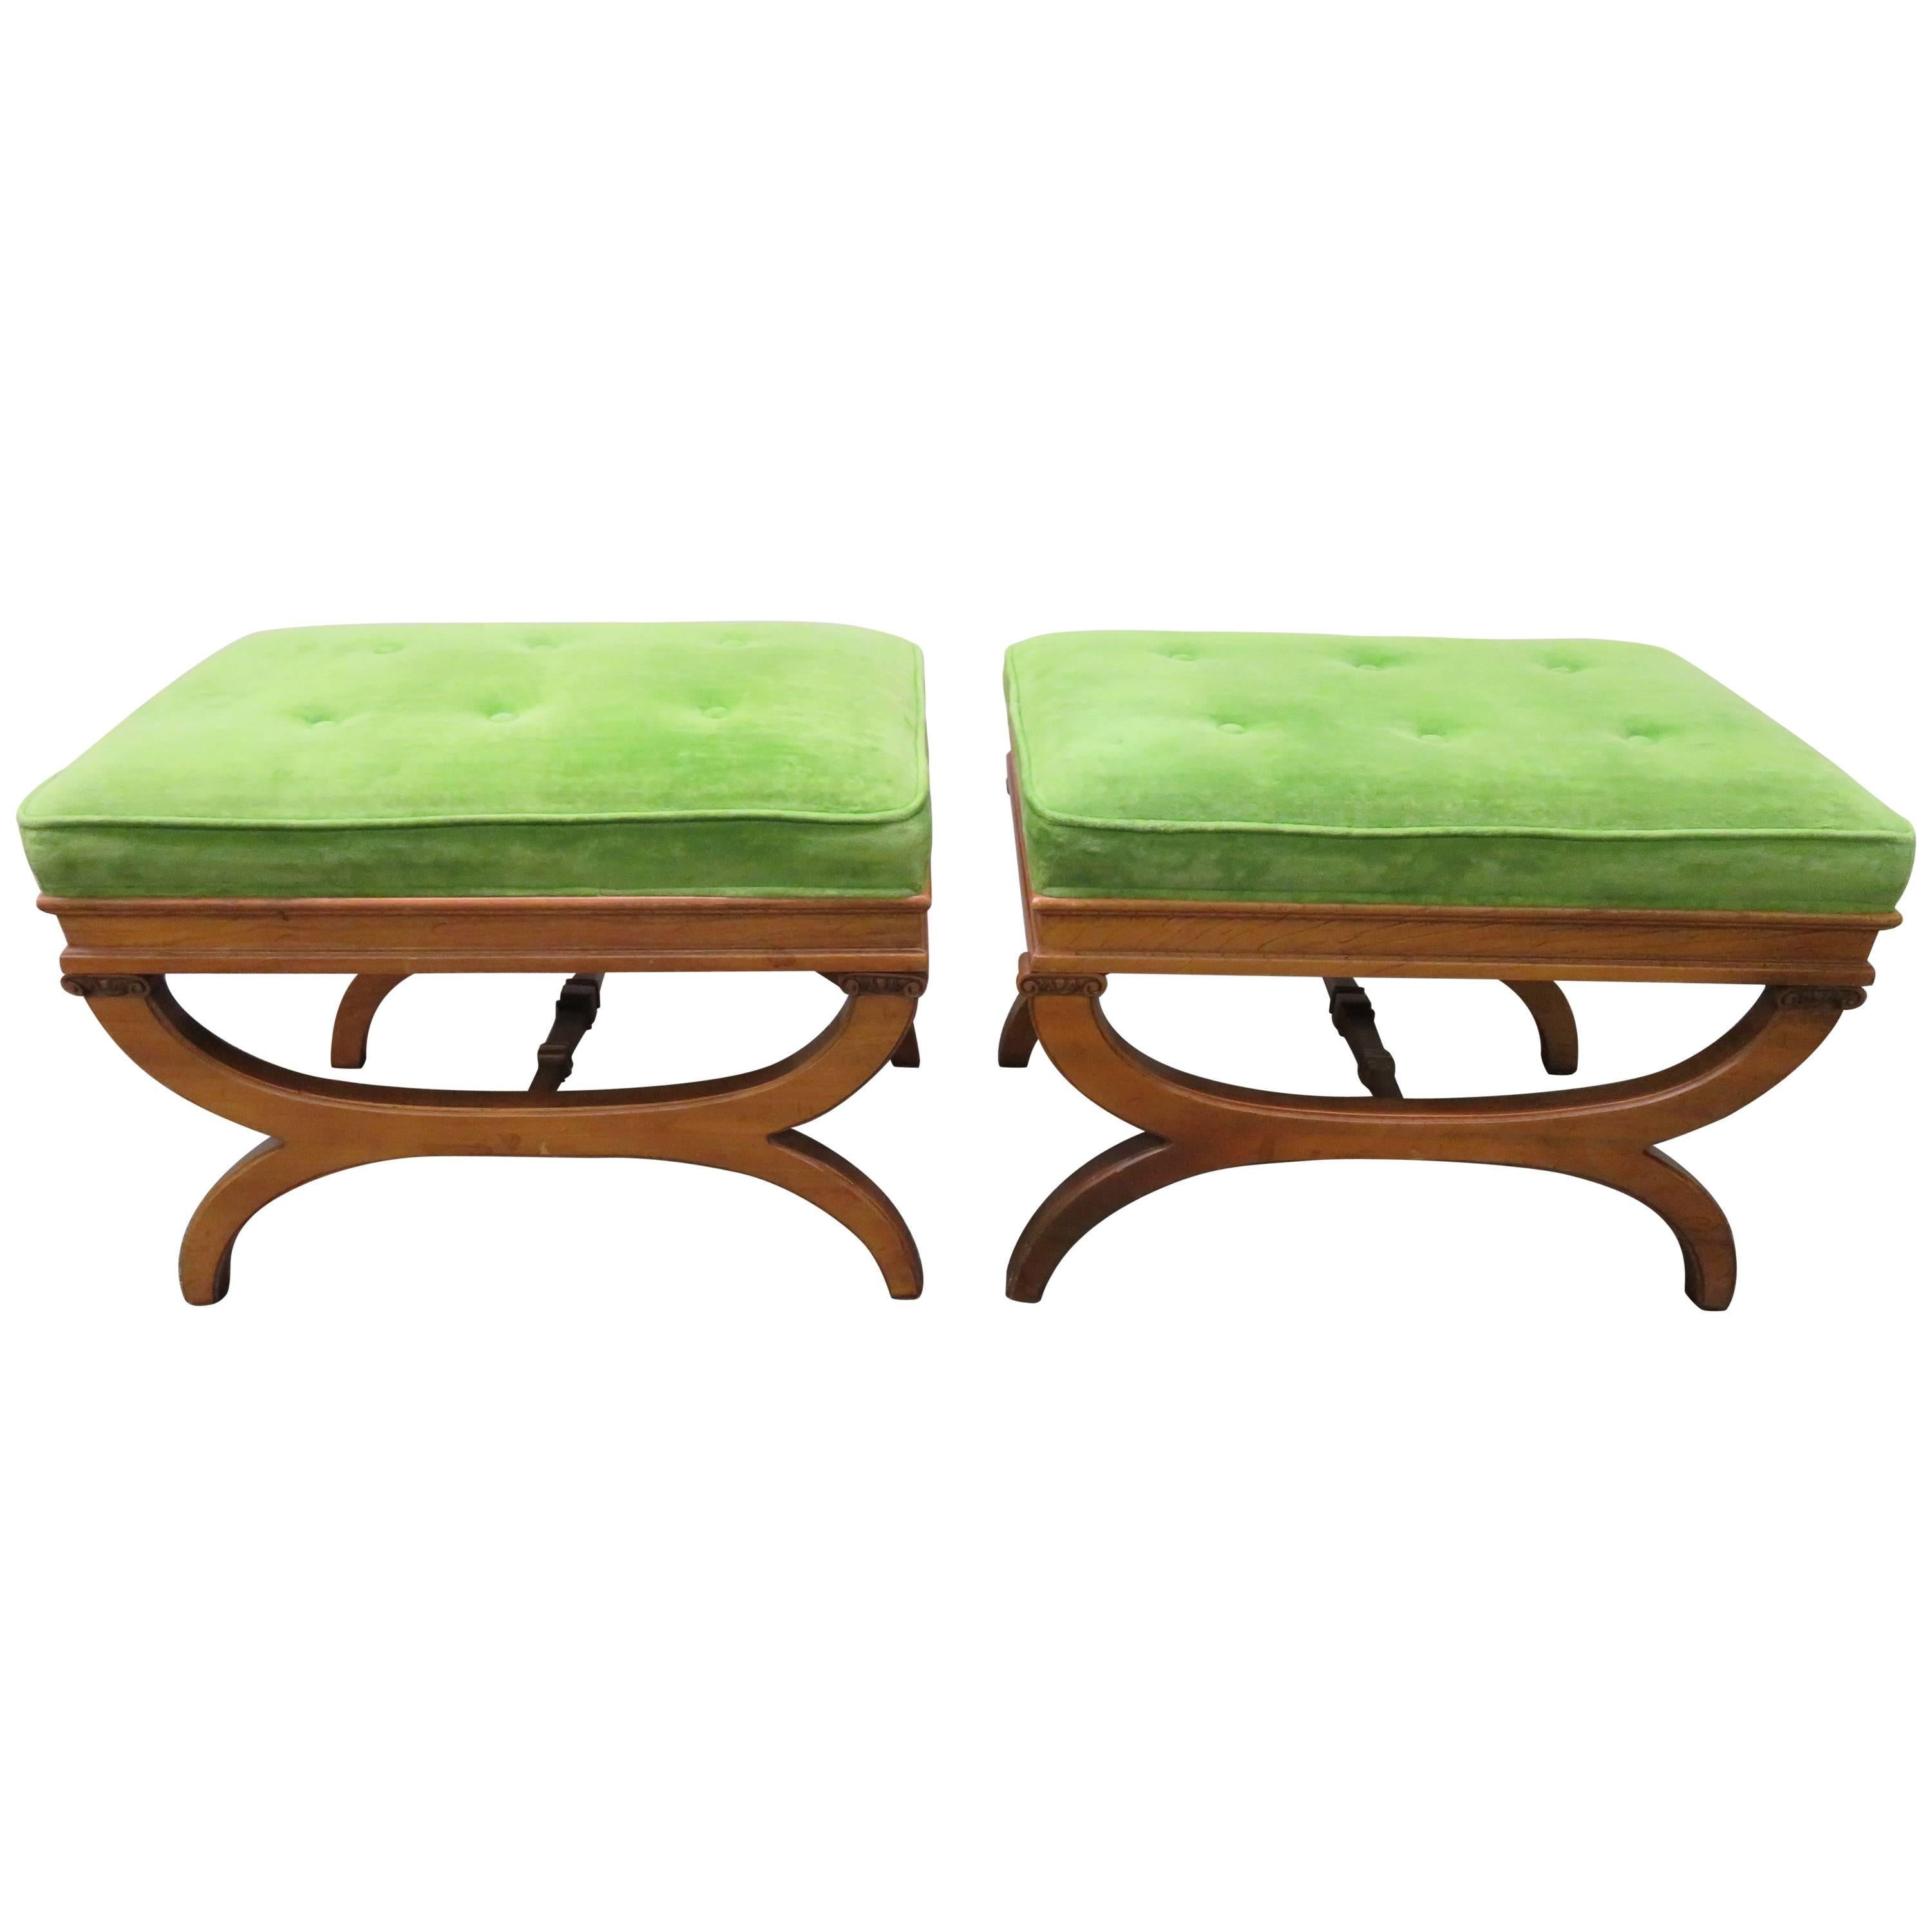 Pair of Carved Walnut Hollywood Regency Style X-Form Benches Stools